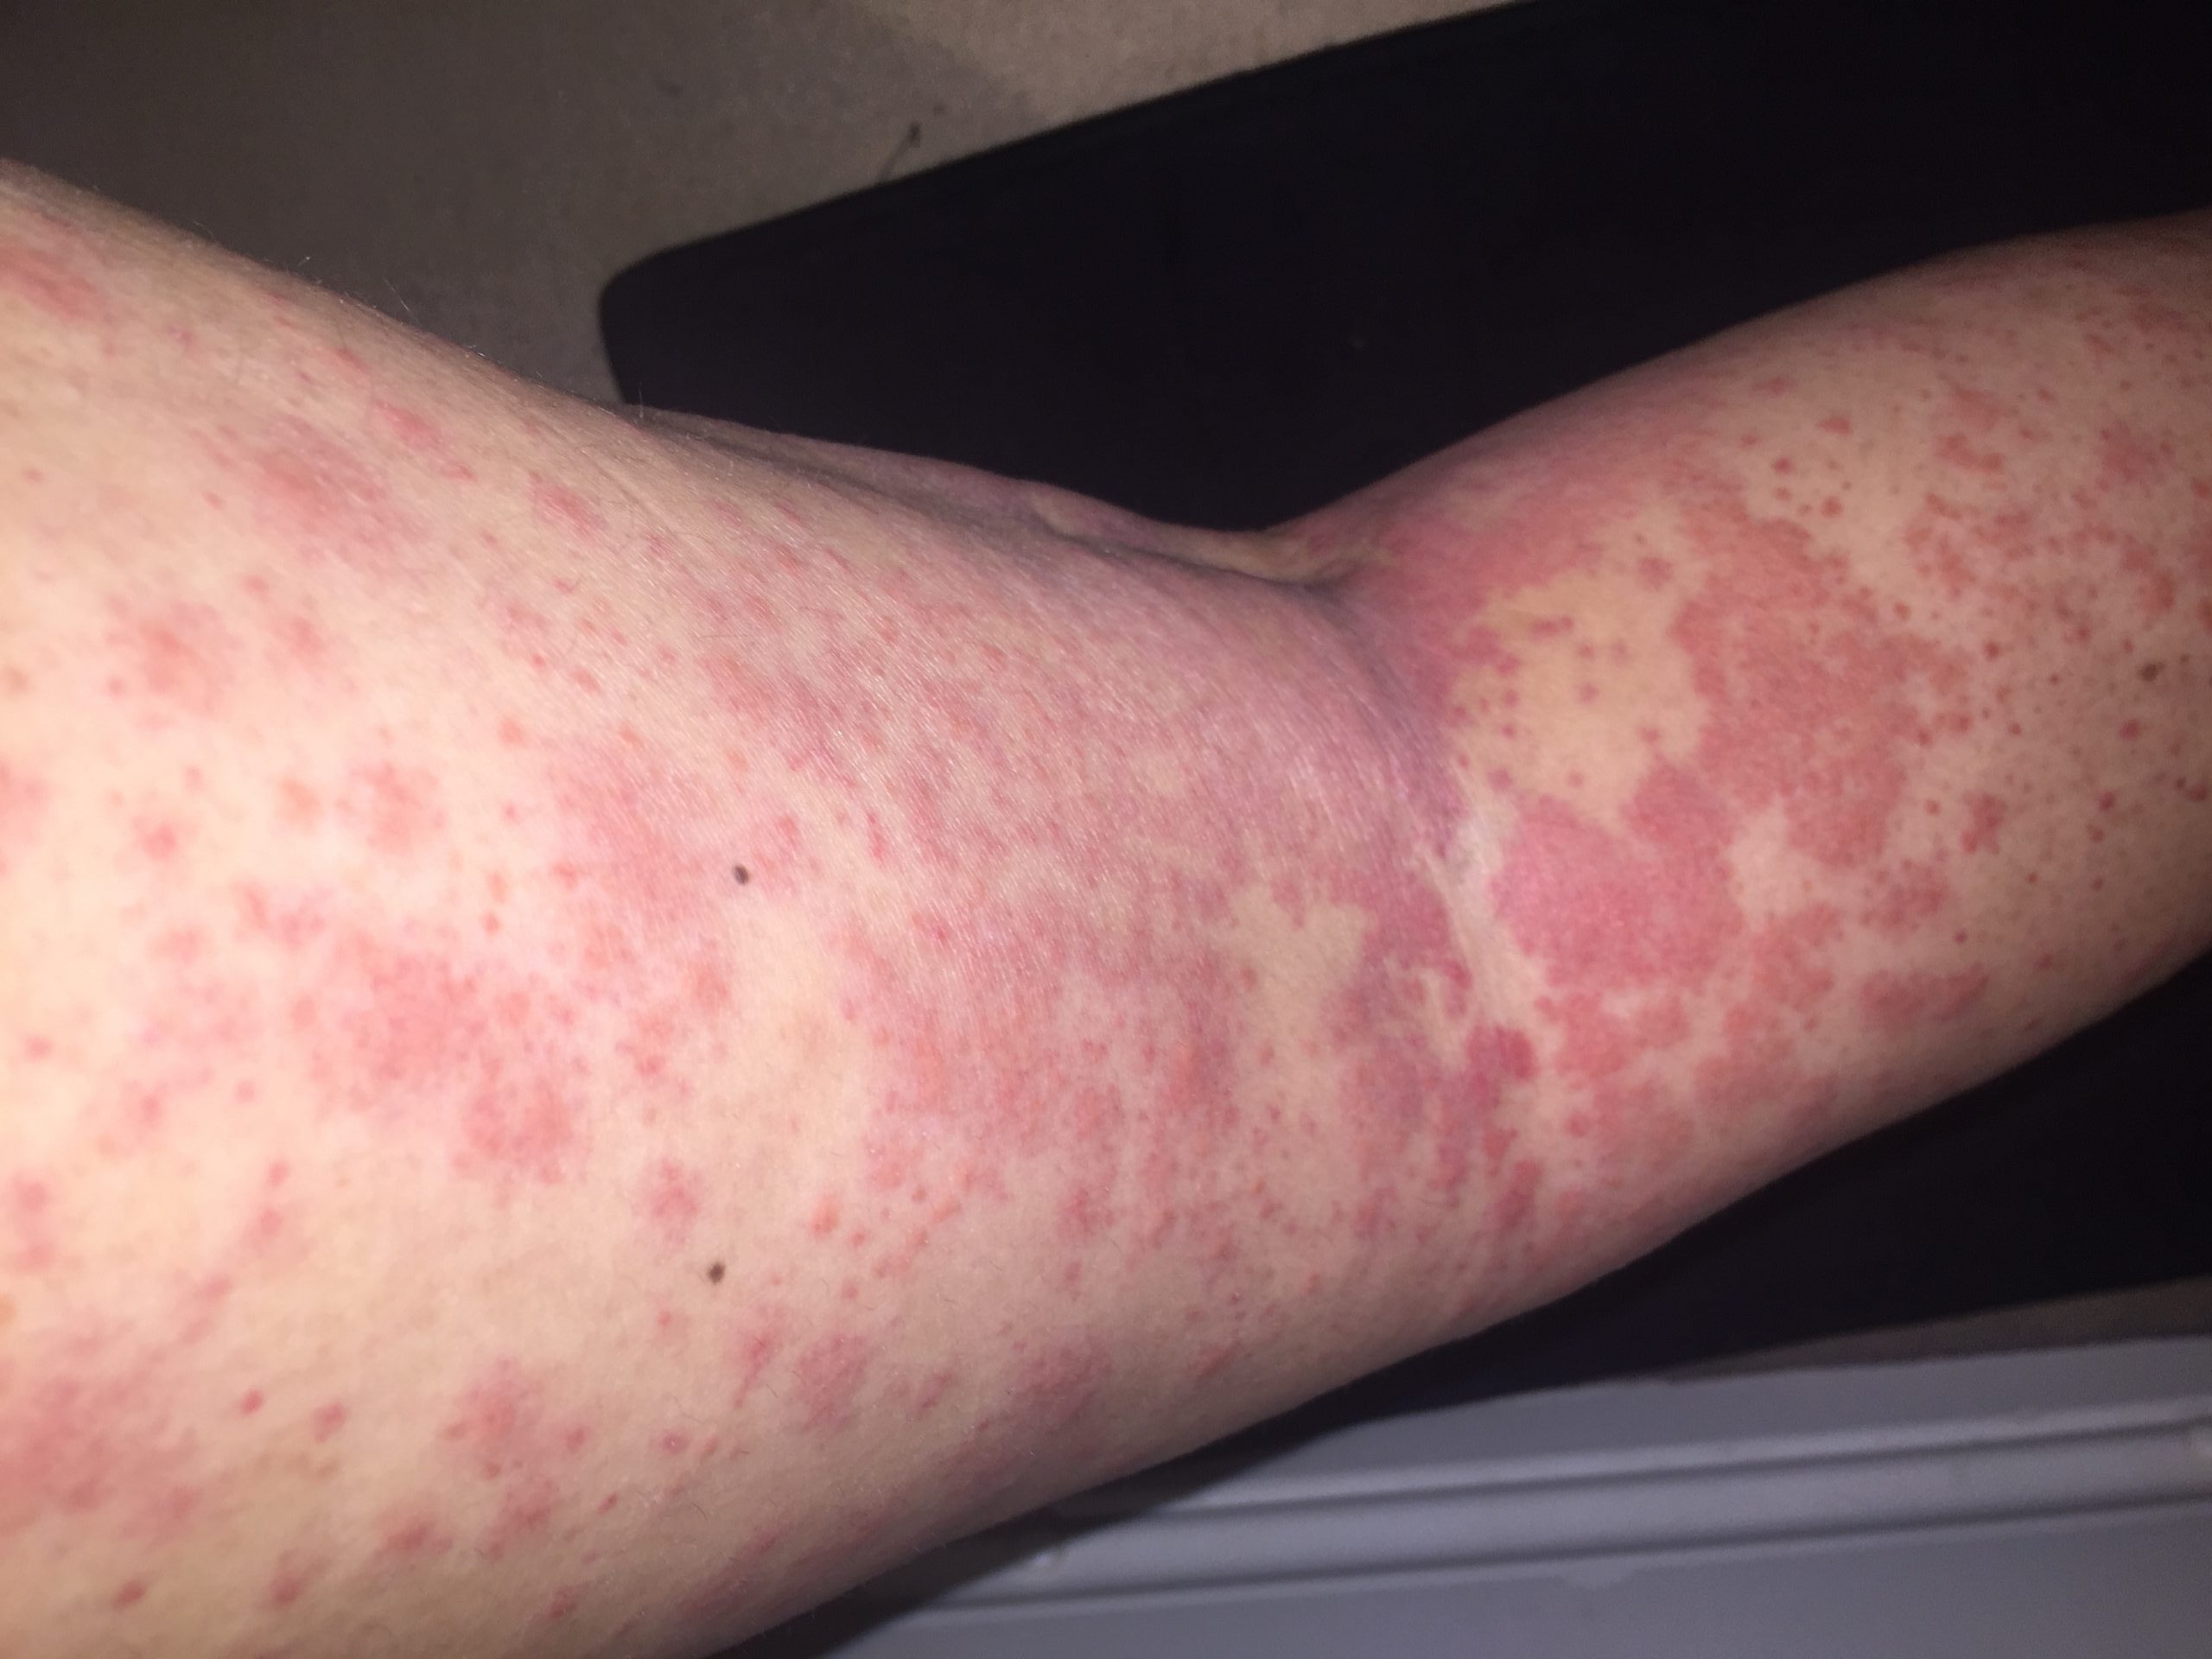 10-serious-conditions-that-rashes-and-hives-can-indicate-page-2